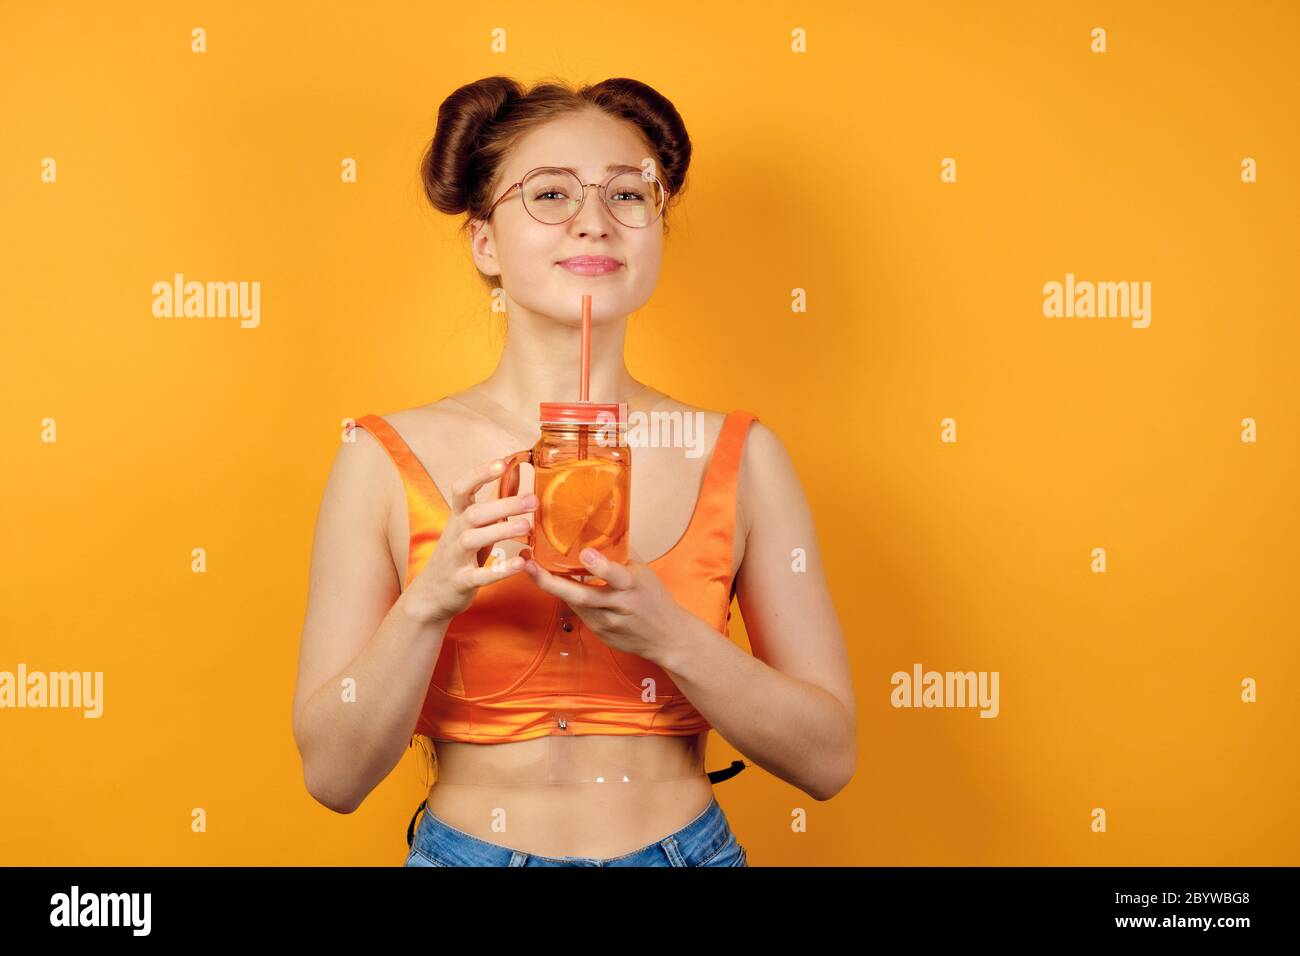 Red-haired girl in round glasses and an orange top is standing on a yellow background, smiling pretty with a lemonade in hands Stock Photo